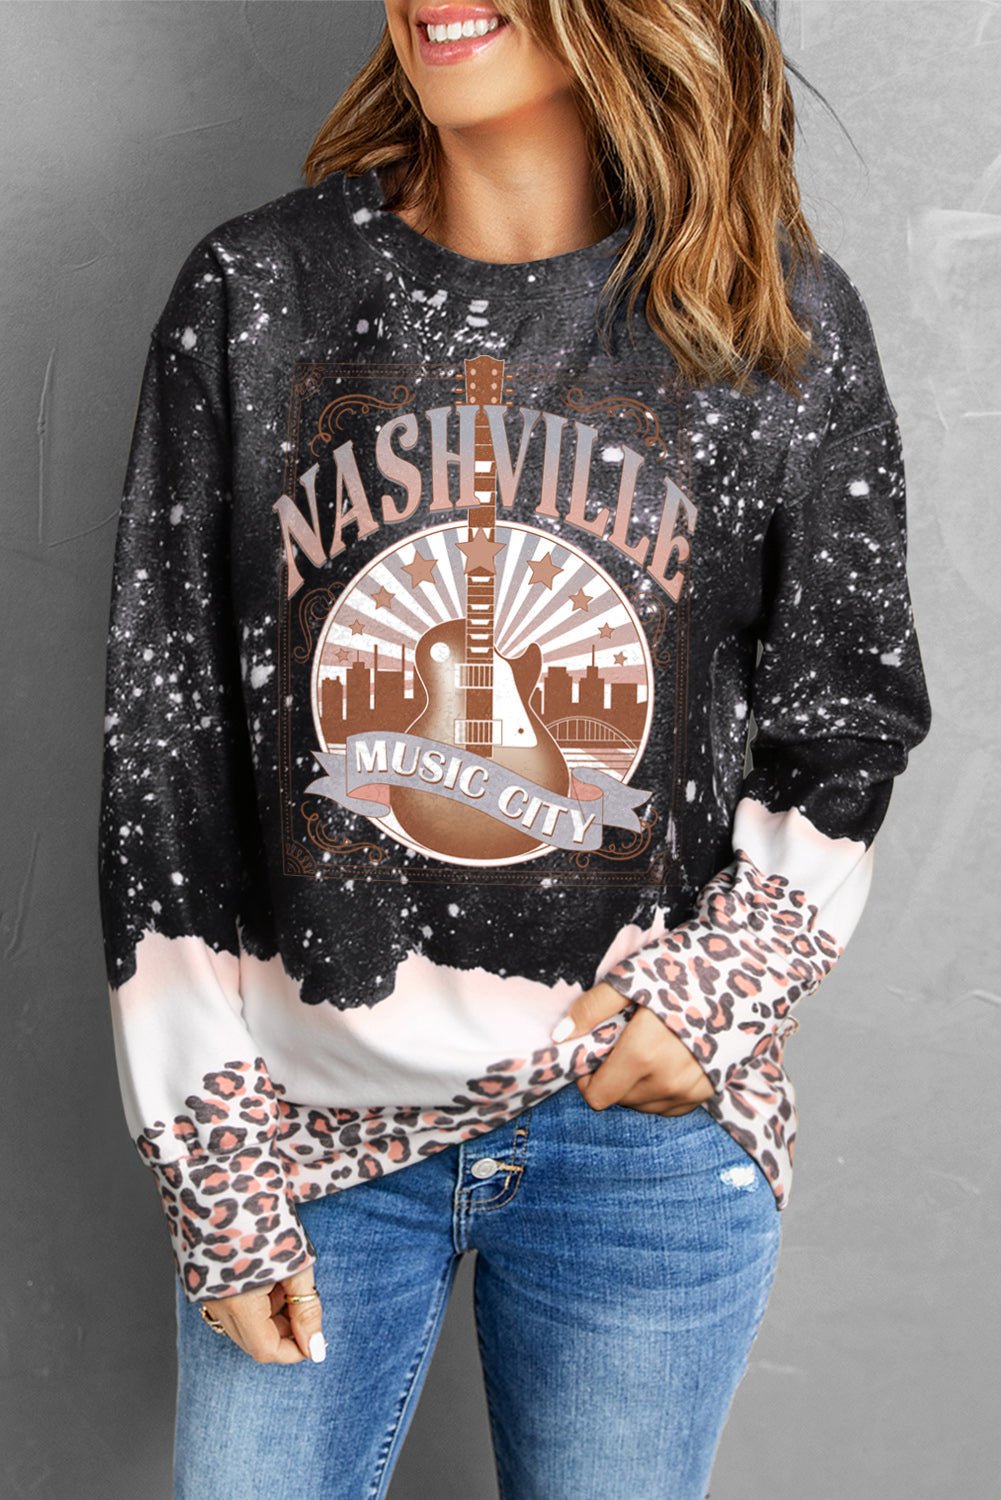 "Enchanting Nashville Nights" - Embrace the city's musical spirit with our Nashville Music City Graphic Sweatshirt - Let its stunning skyline and leopard print background leave an indelible impression on your senses, while enhancing your natural beauty. - Guy Christopher